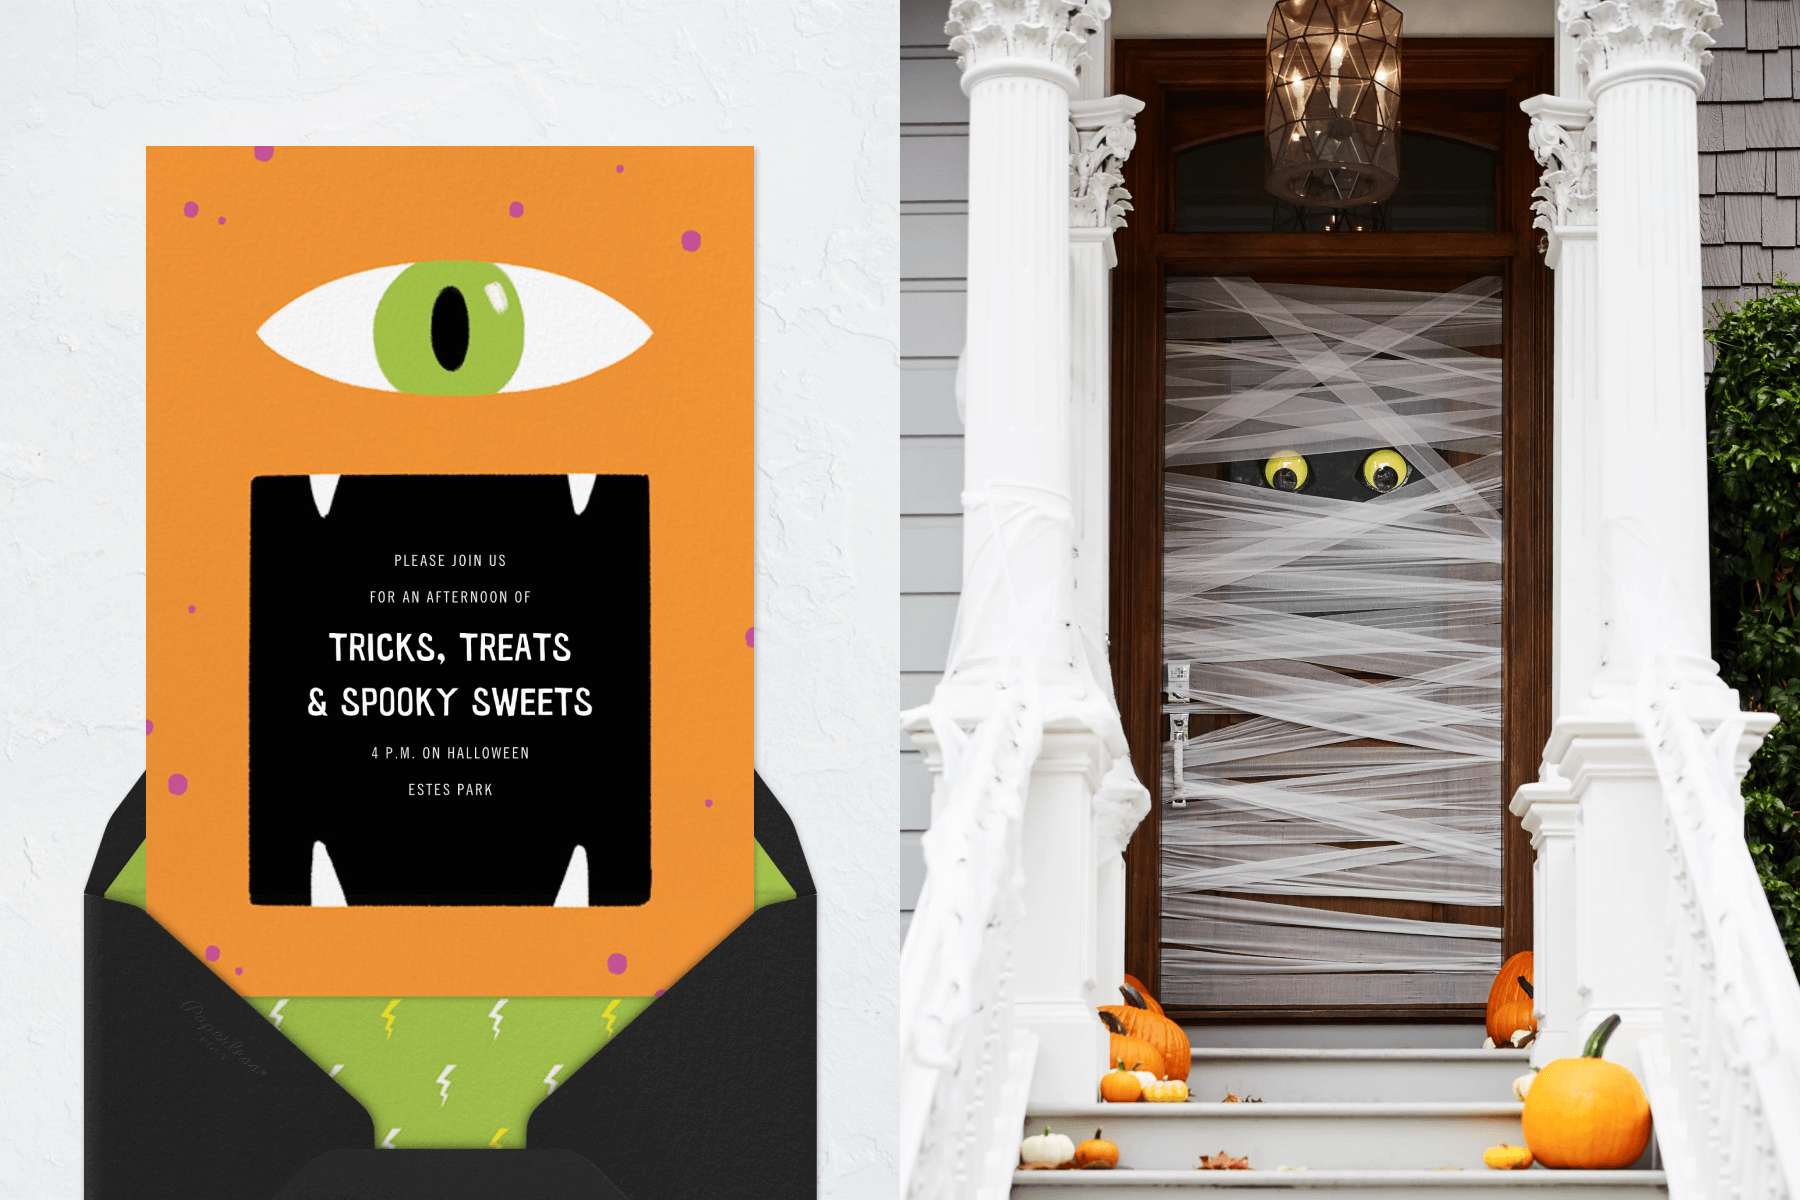 Left: An orange invitation designed to look like a one-eyed monster with the party details in the open black mouth. Right: A front door is decorated with sheer white fabric strips to resemble a mummy with yellow eyes peering out.